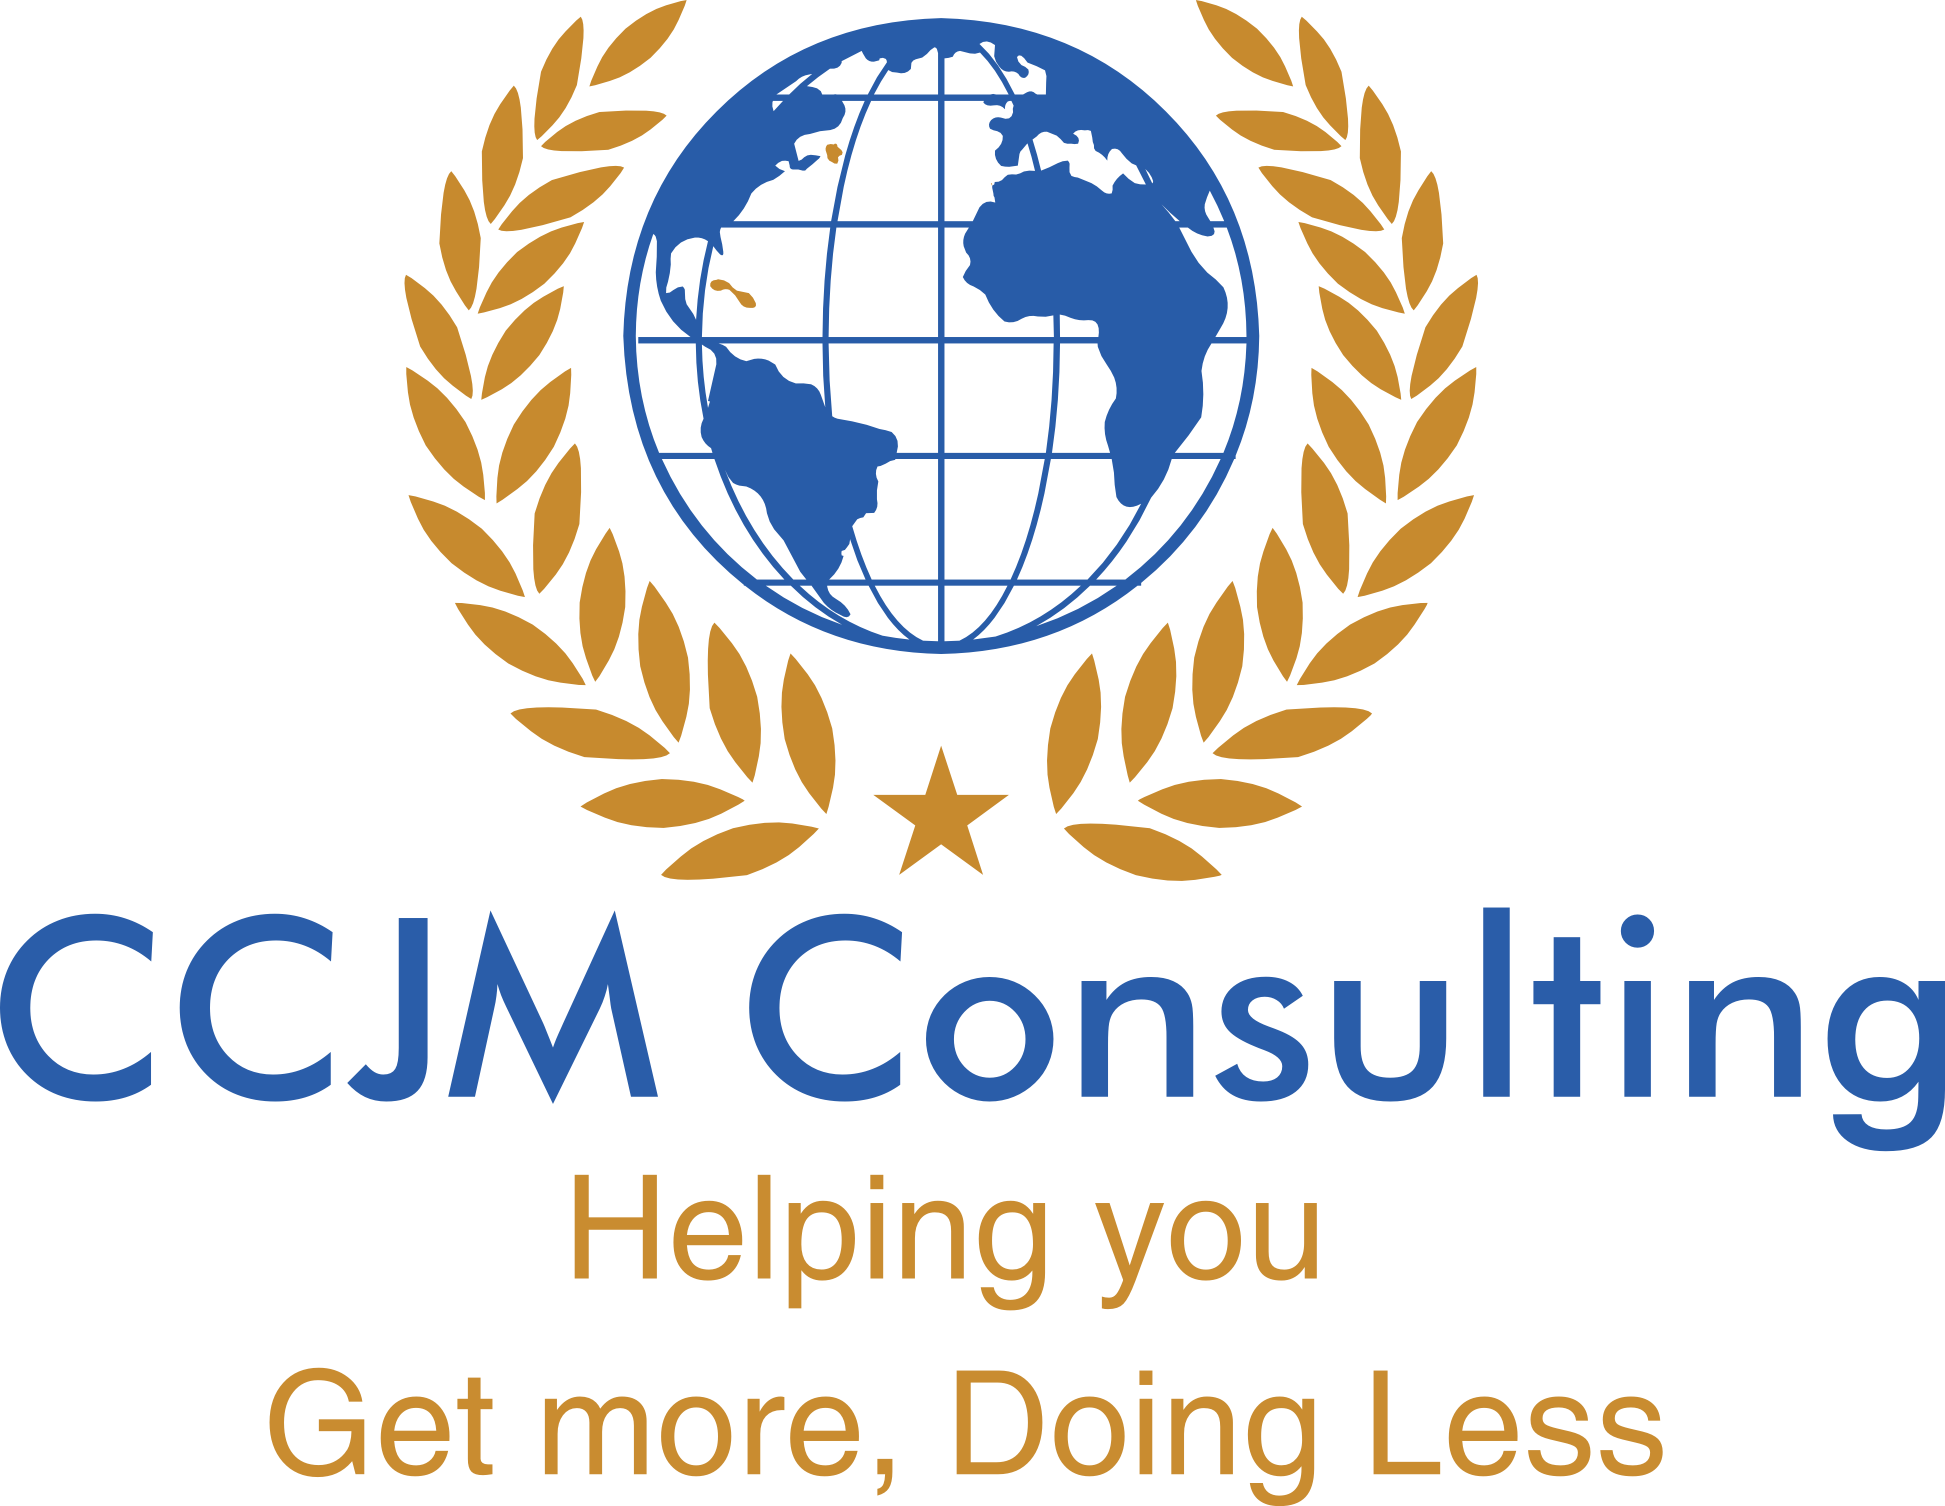 Health and Wellness Industry Consultant, CCJM Consulting, Aims to Make More Businesses Succeed in Coming Years